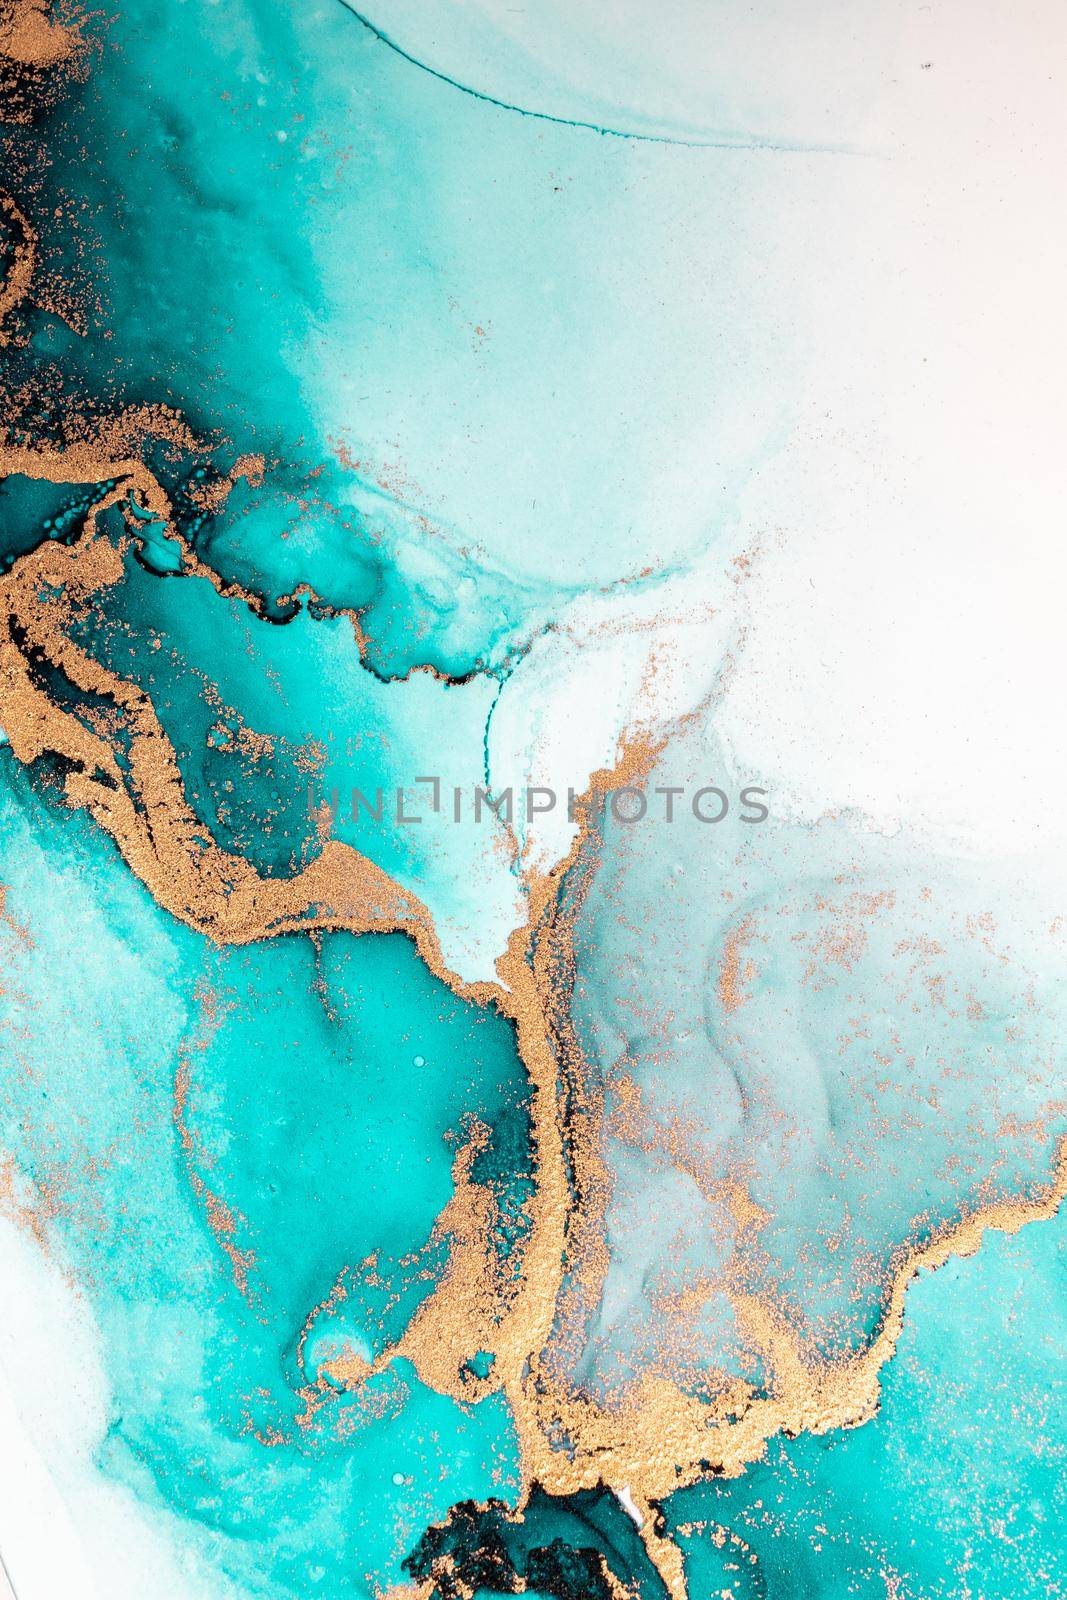 Ocean blue abstract background of marble liquid ink art painting on paper . Image of original artwork watercolor alcohol ink paint on high quality paper texture .